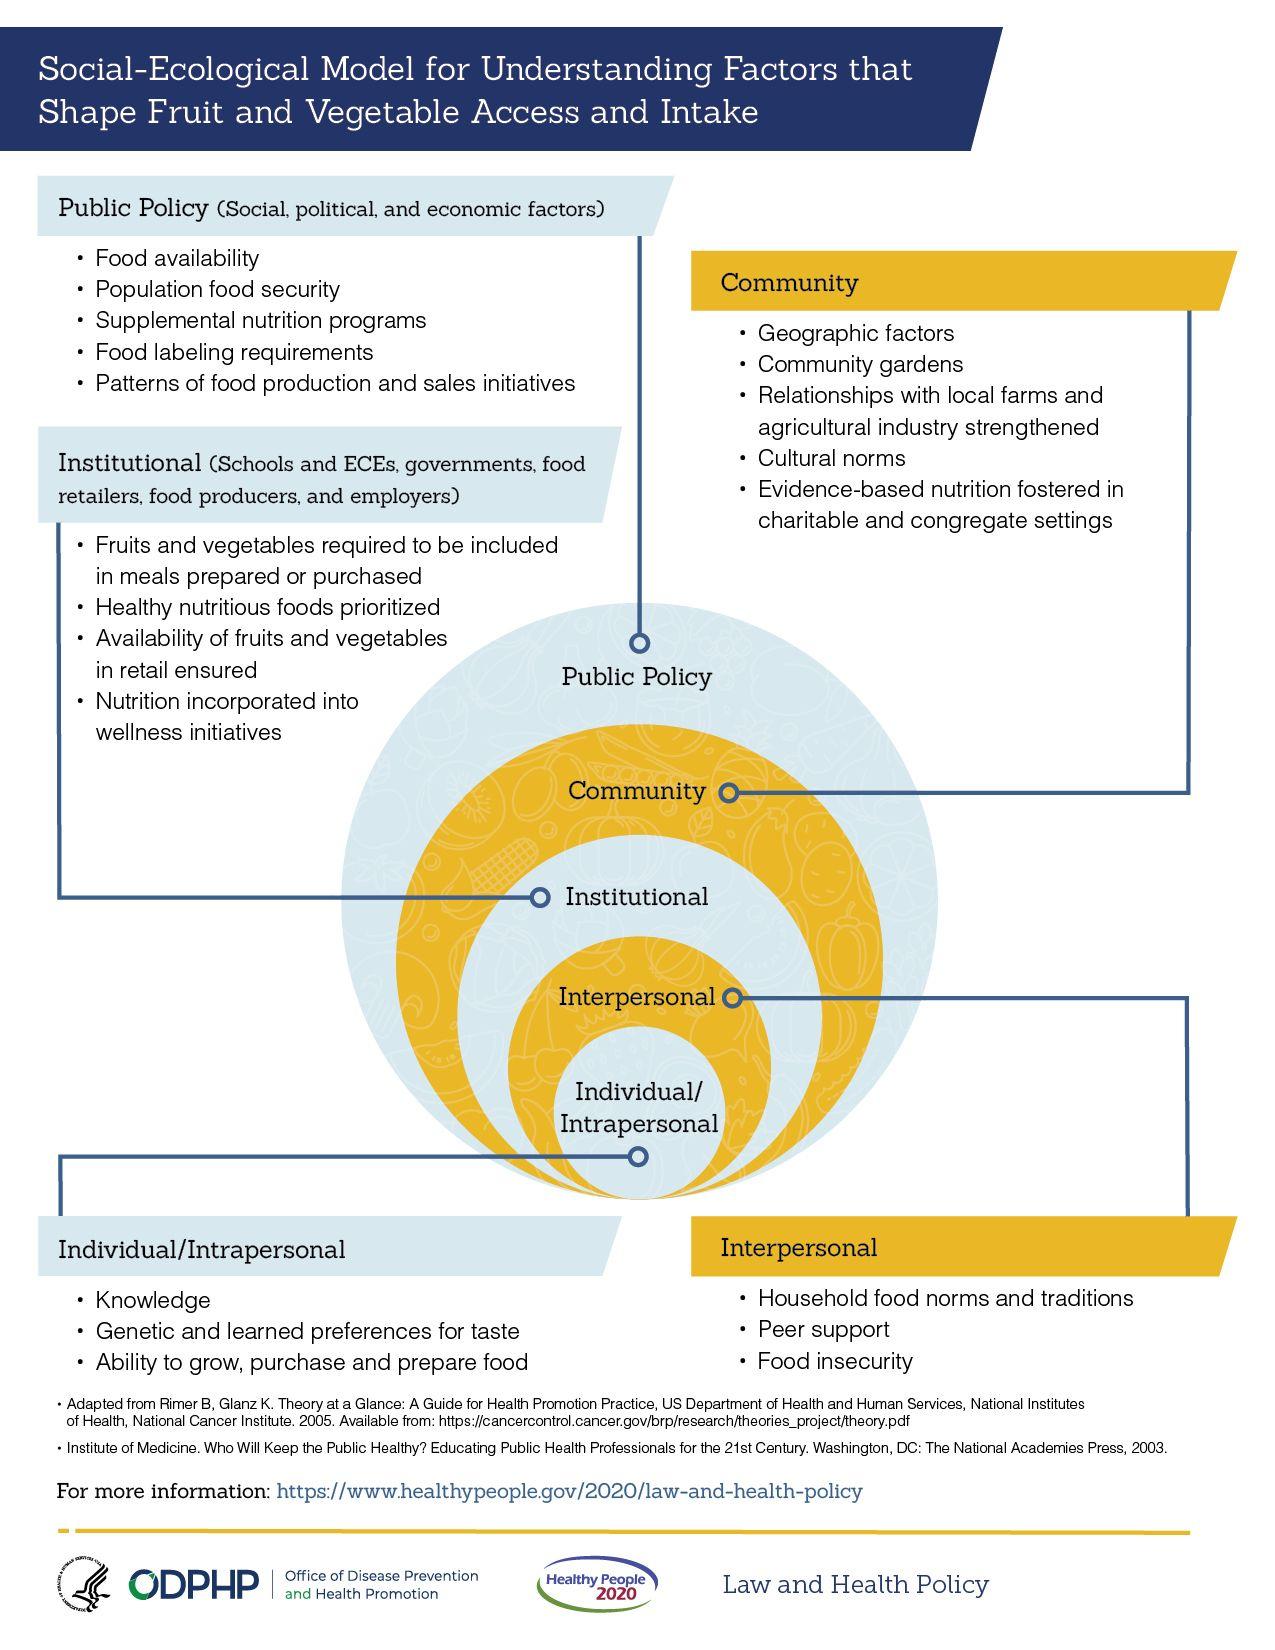 Healthy People 2020 Logo - Law and Health Policy: Social-Ecological Model Graphic | Healthy ...